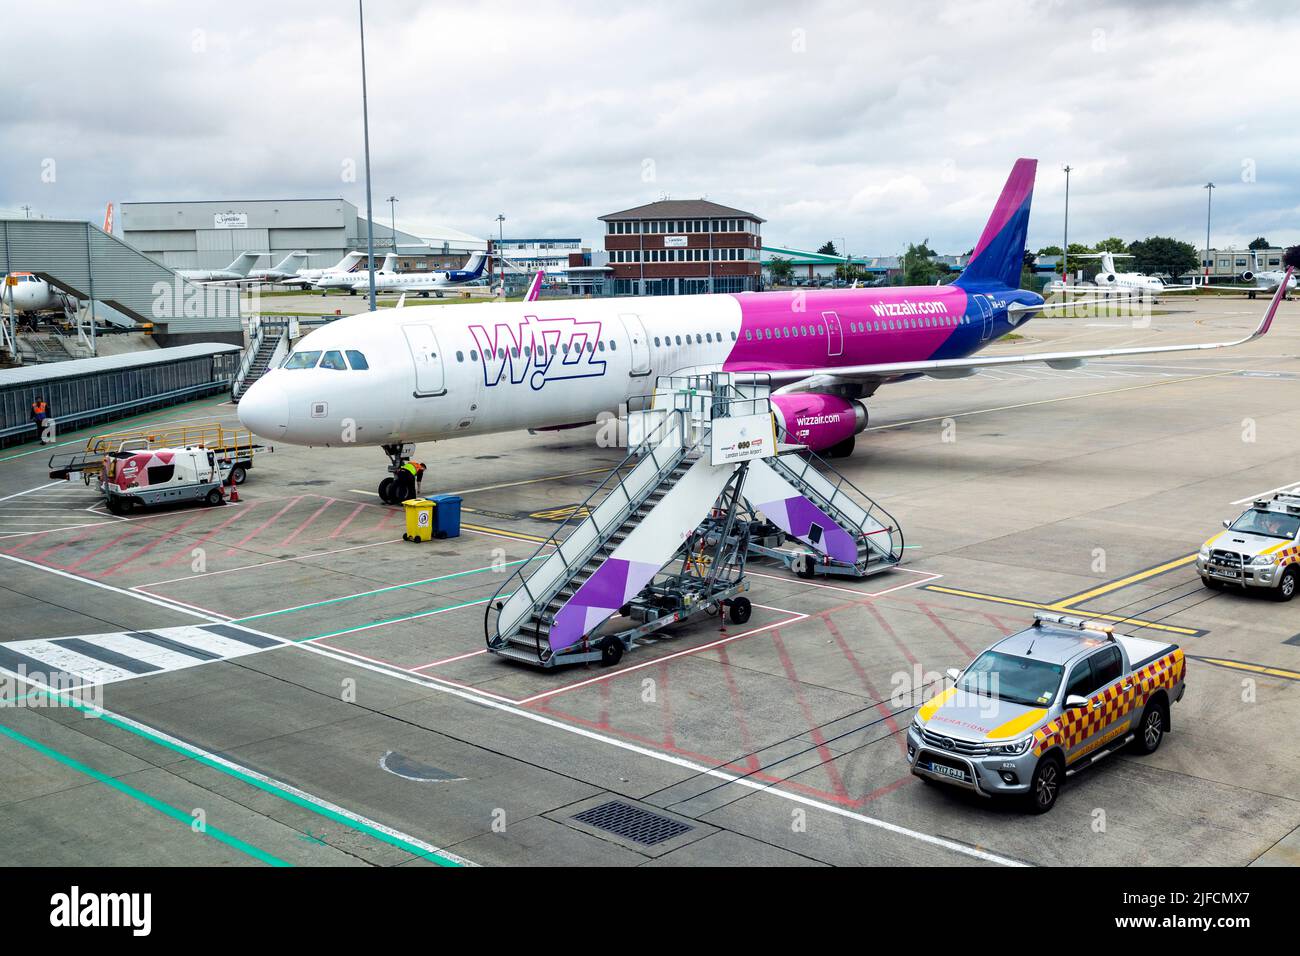 Wizz Air airplane on the tarmac in Luton Airport, Luton, London, UK Stock Photo